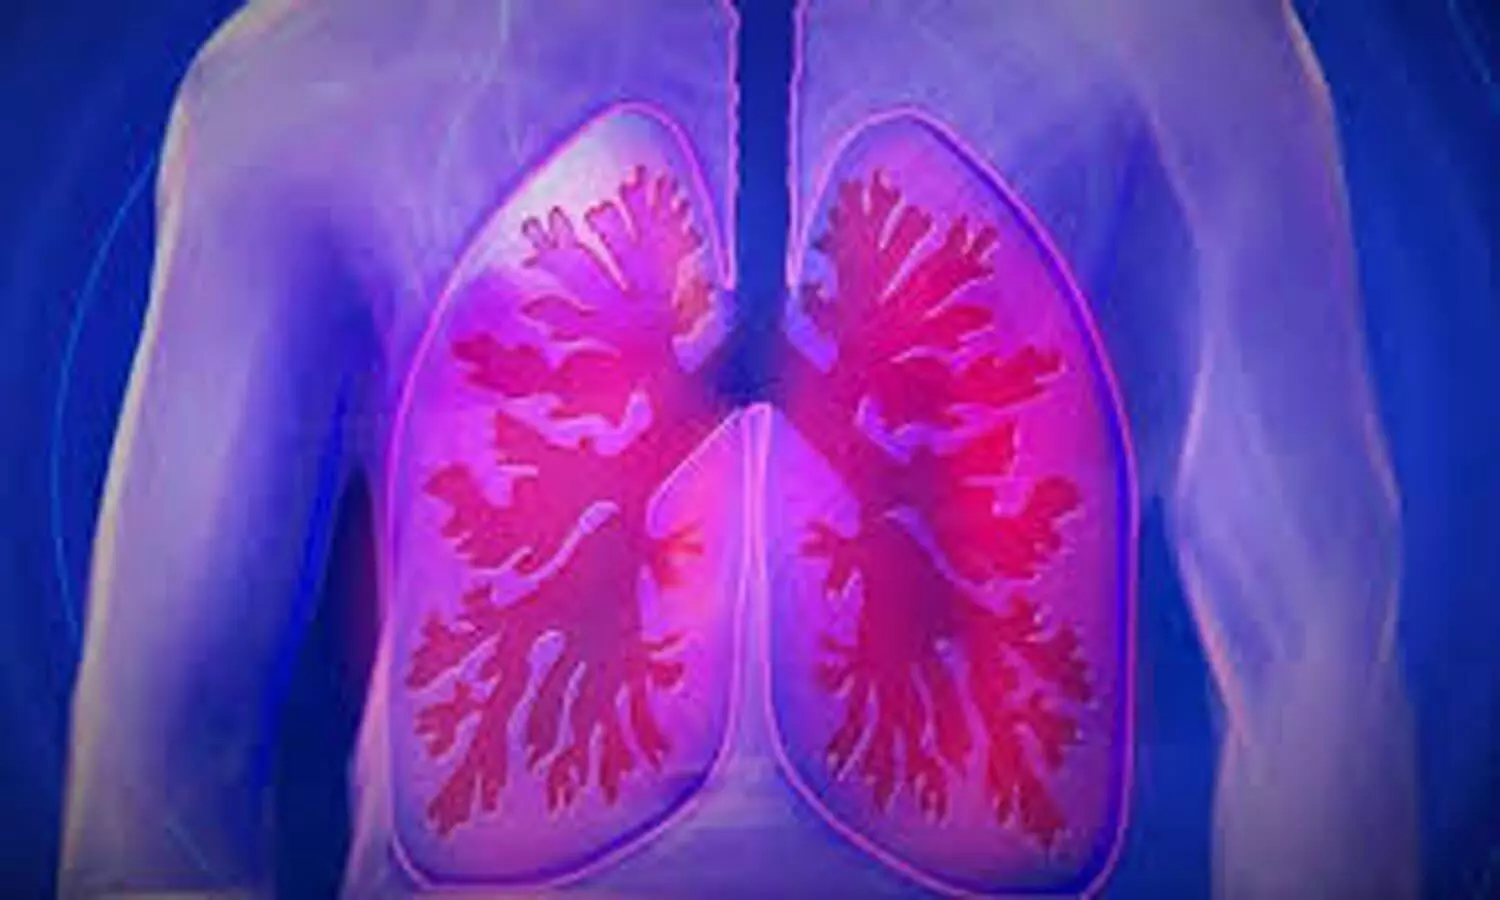 CBD increases level of protective peptide and reduces lung damage from COVID-19